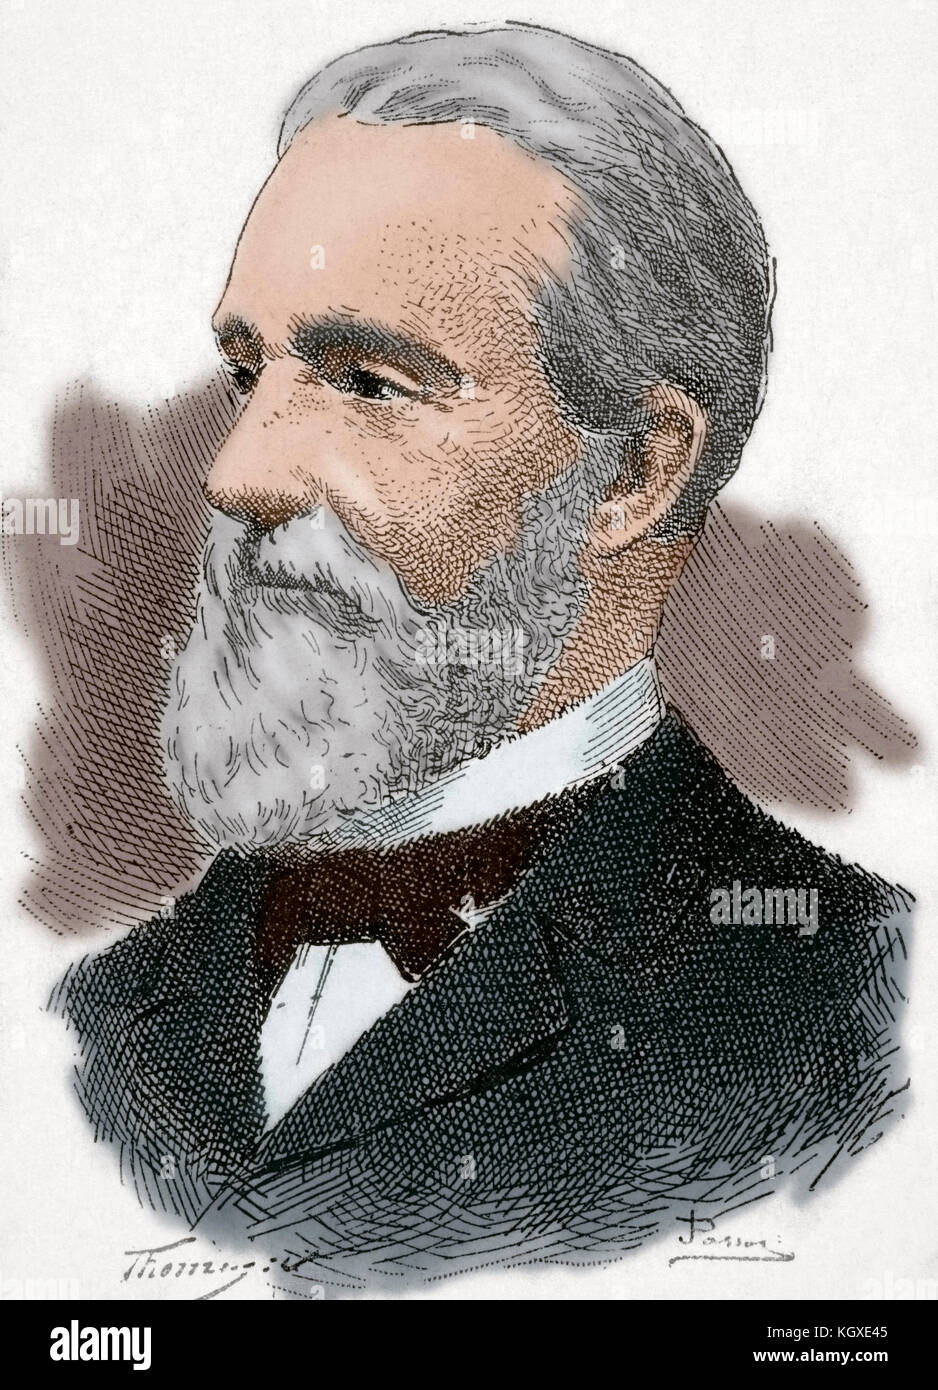 Paul-Armand Challemel-Lacour (1827-1896). French statesman. Portrait. Engraving by Passos. 'Ilustracion Americana', 1896. Colored. Stock Photo